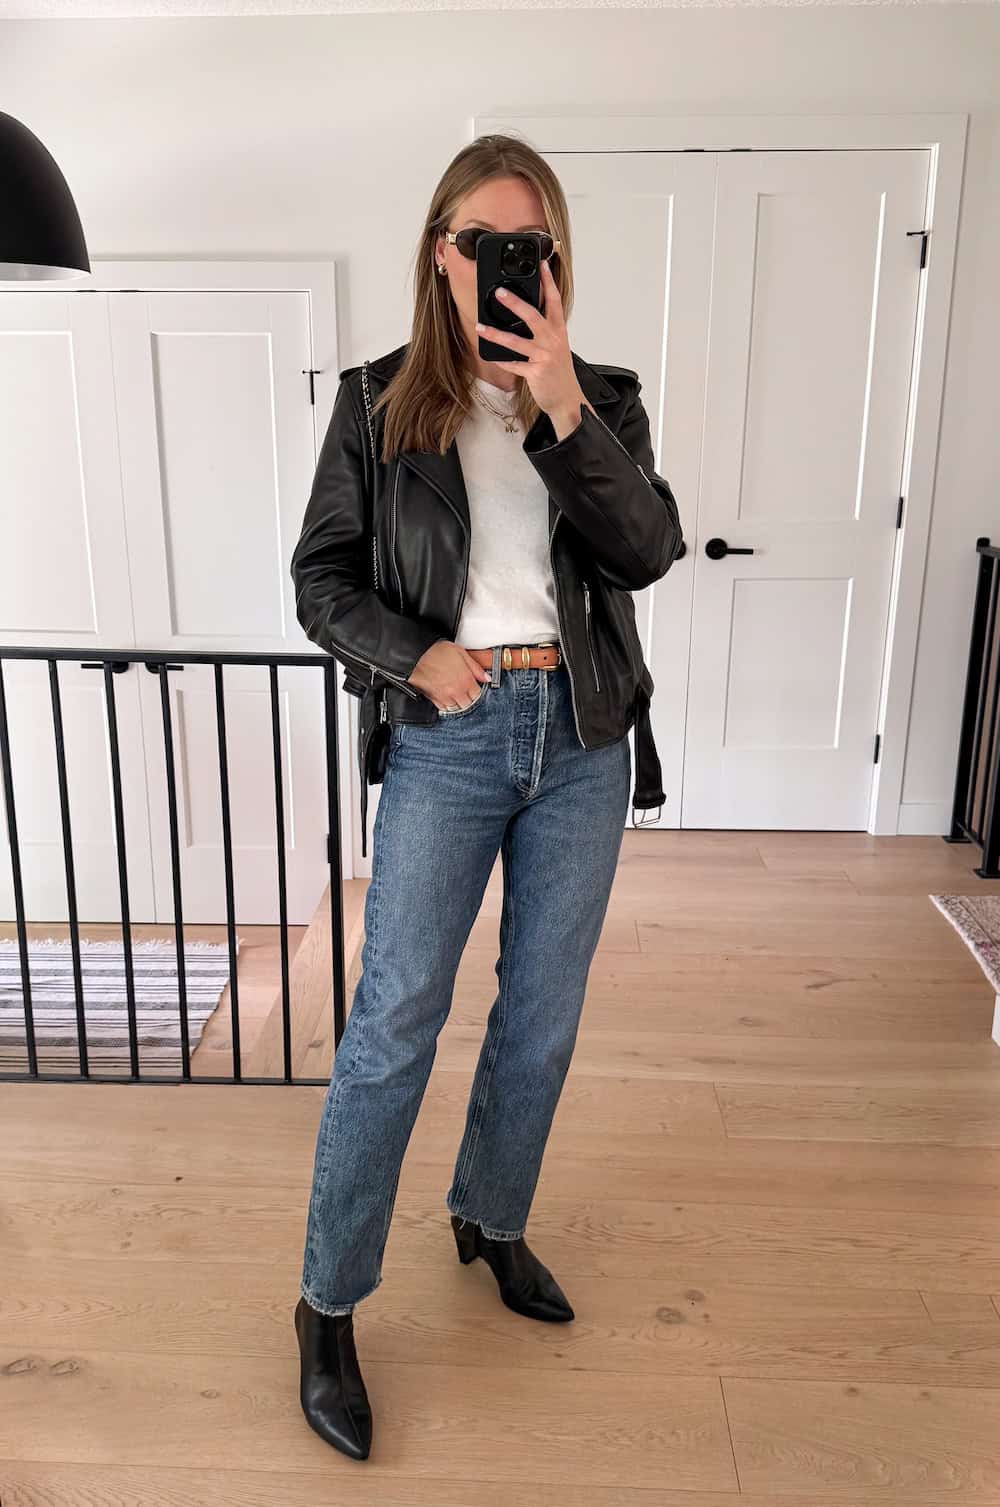 Christal wearing jeans, a white t-shirt, a black leather jacket and black booties.